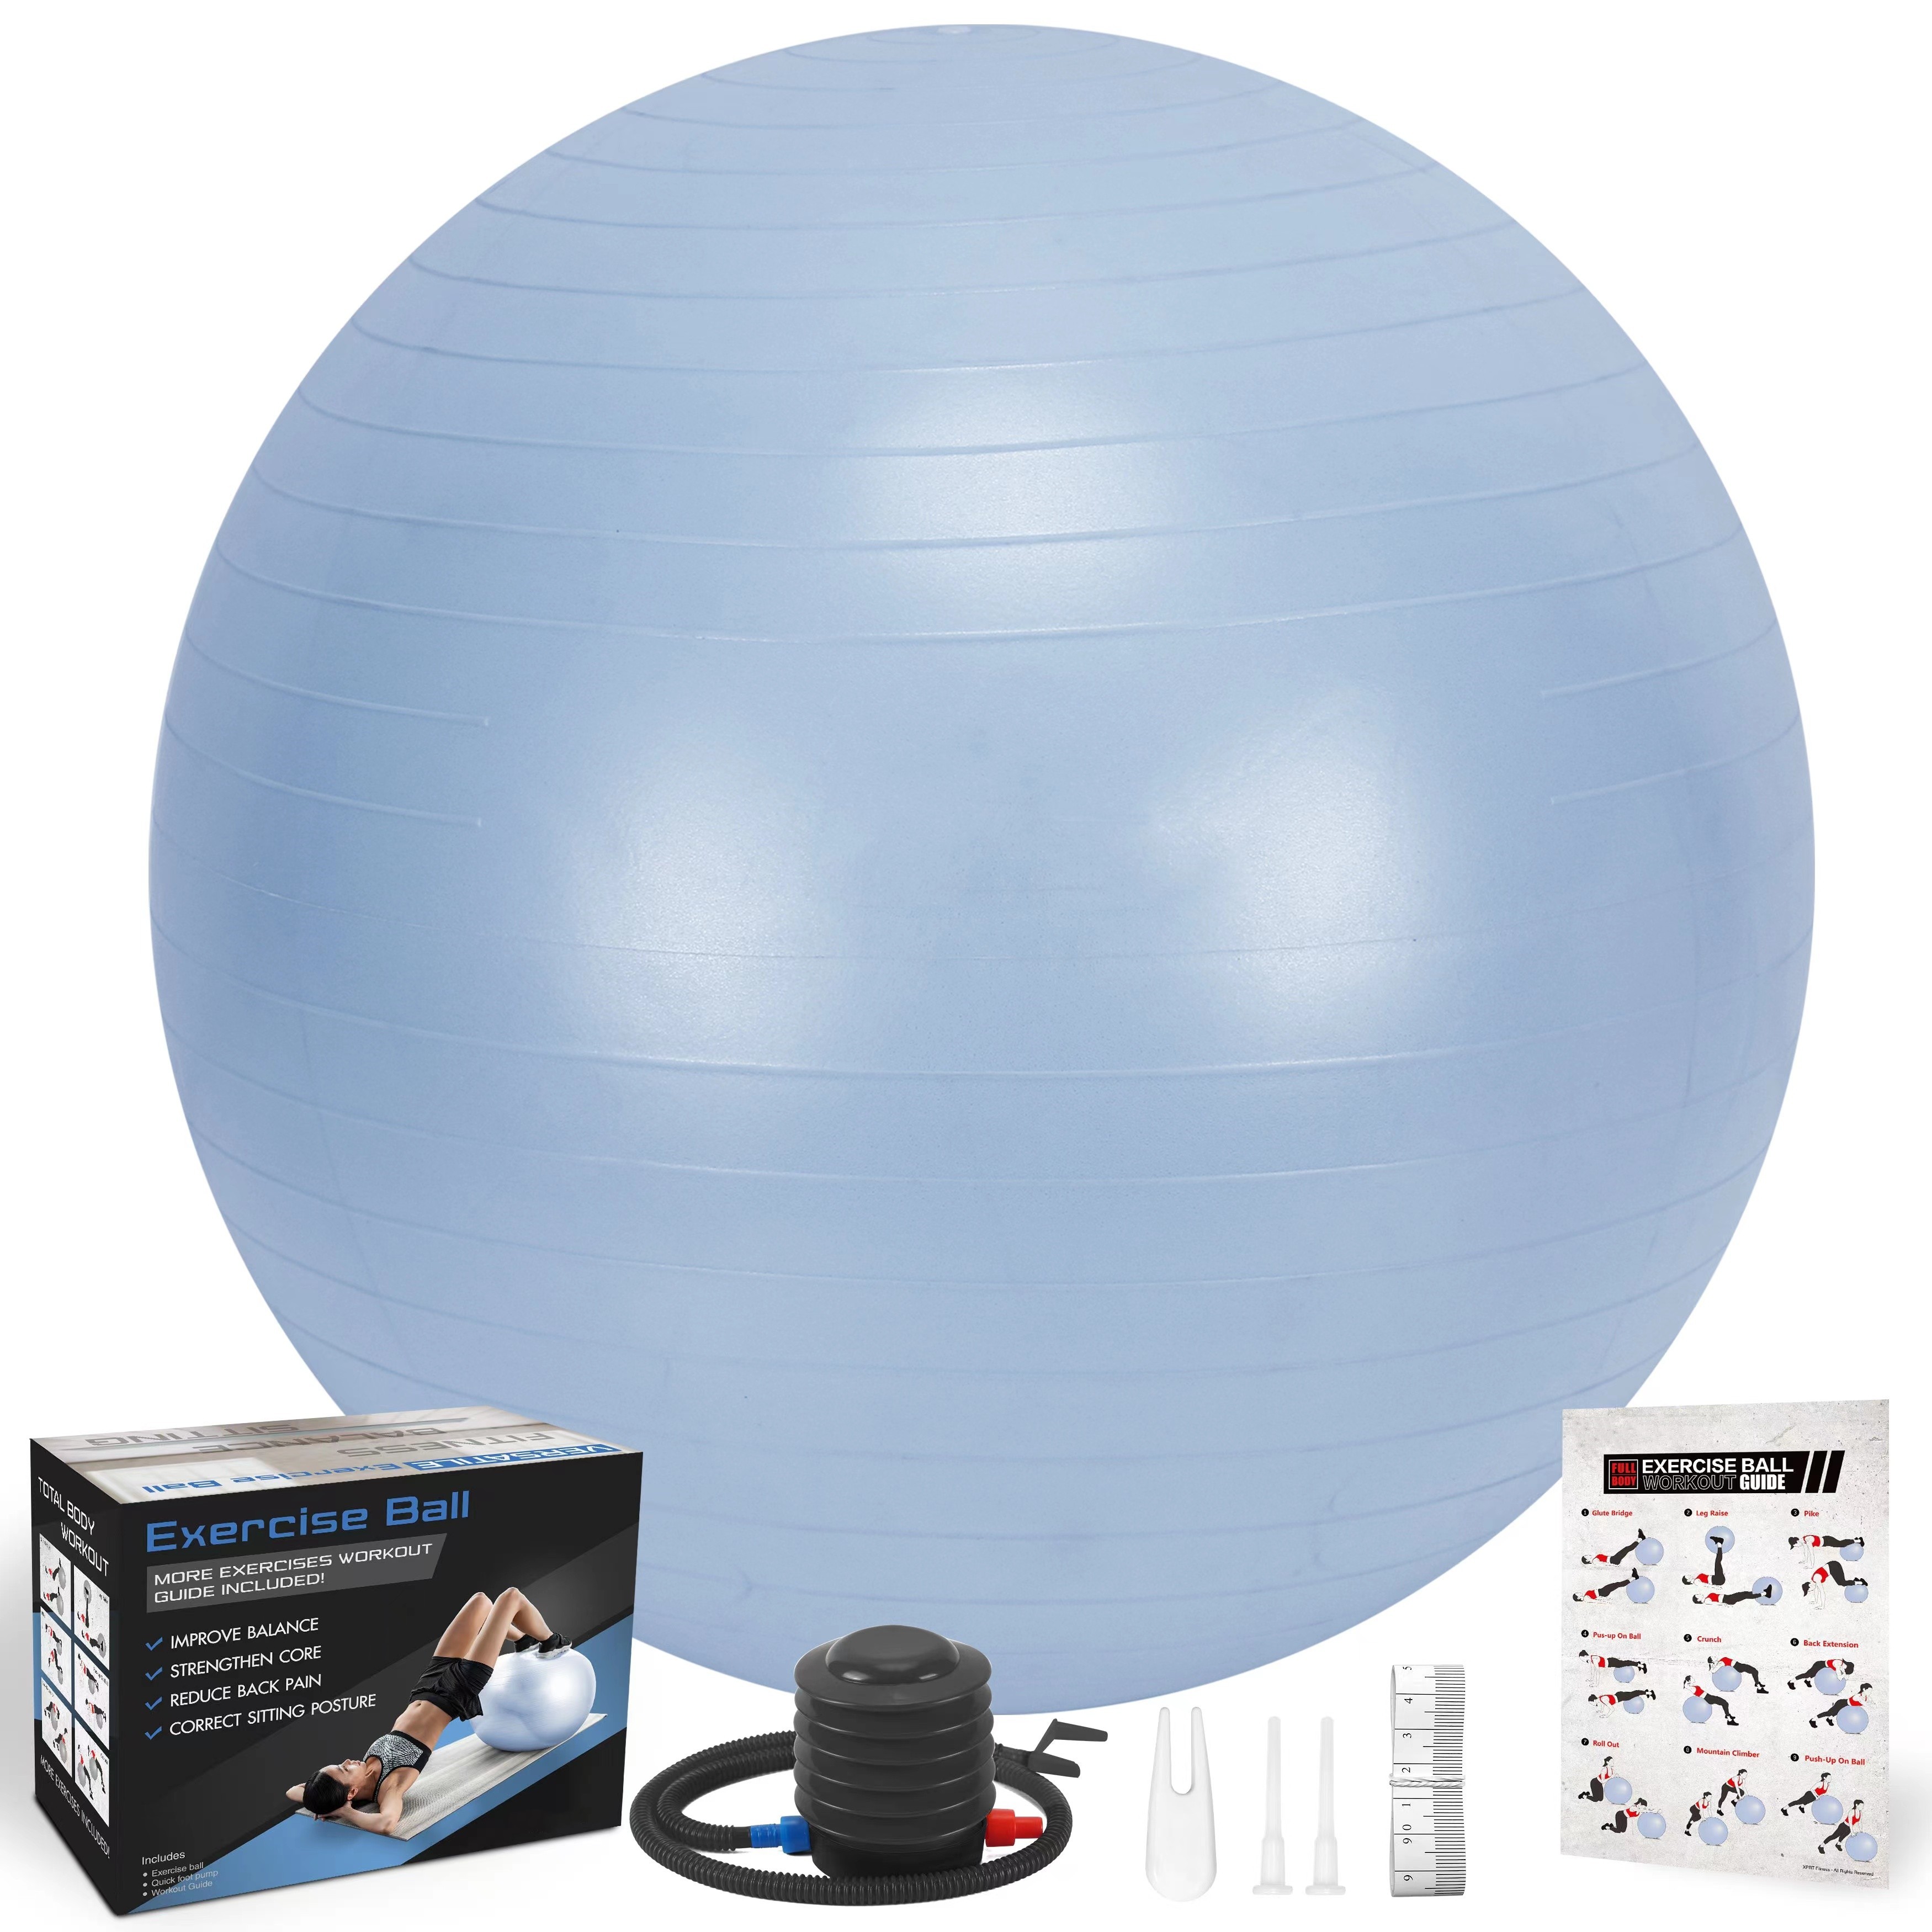 BlUE Exercise and Workout Ball, Yoga Ball Chair, Great for Fitness, Balance and Stability Extra-Thick with Quick Pump 